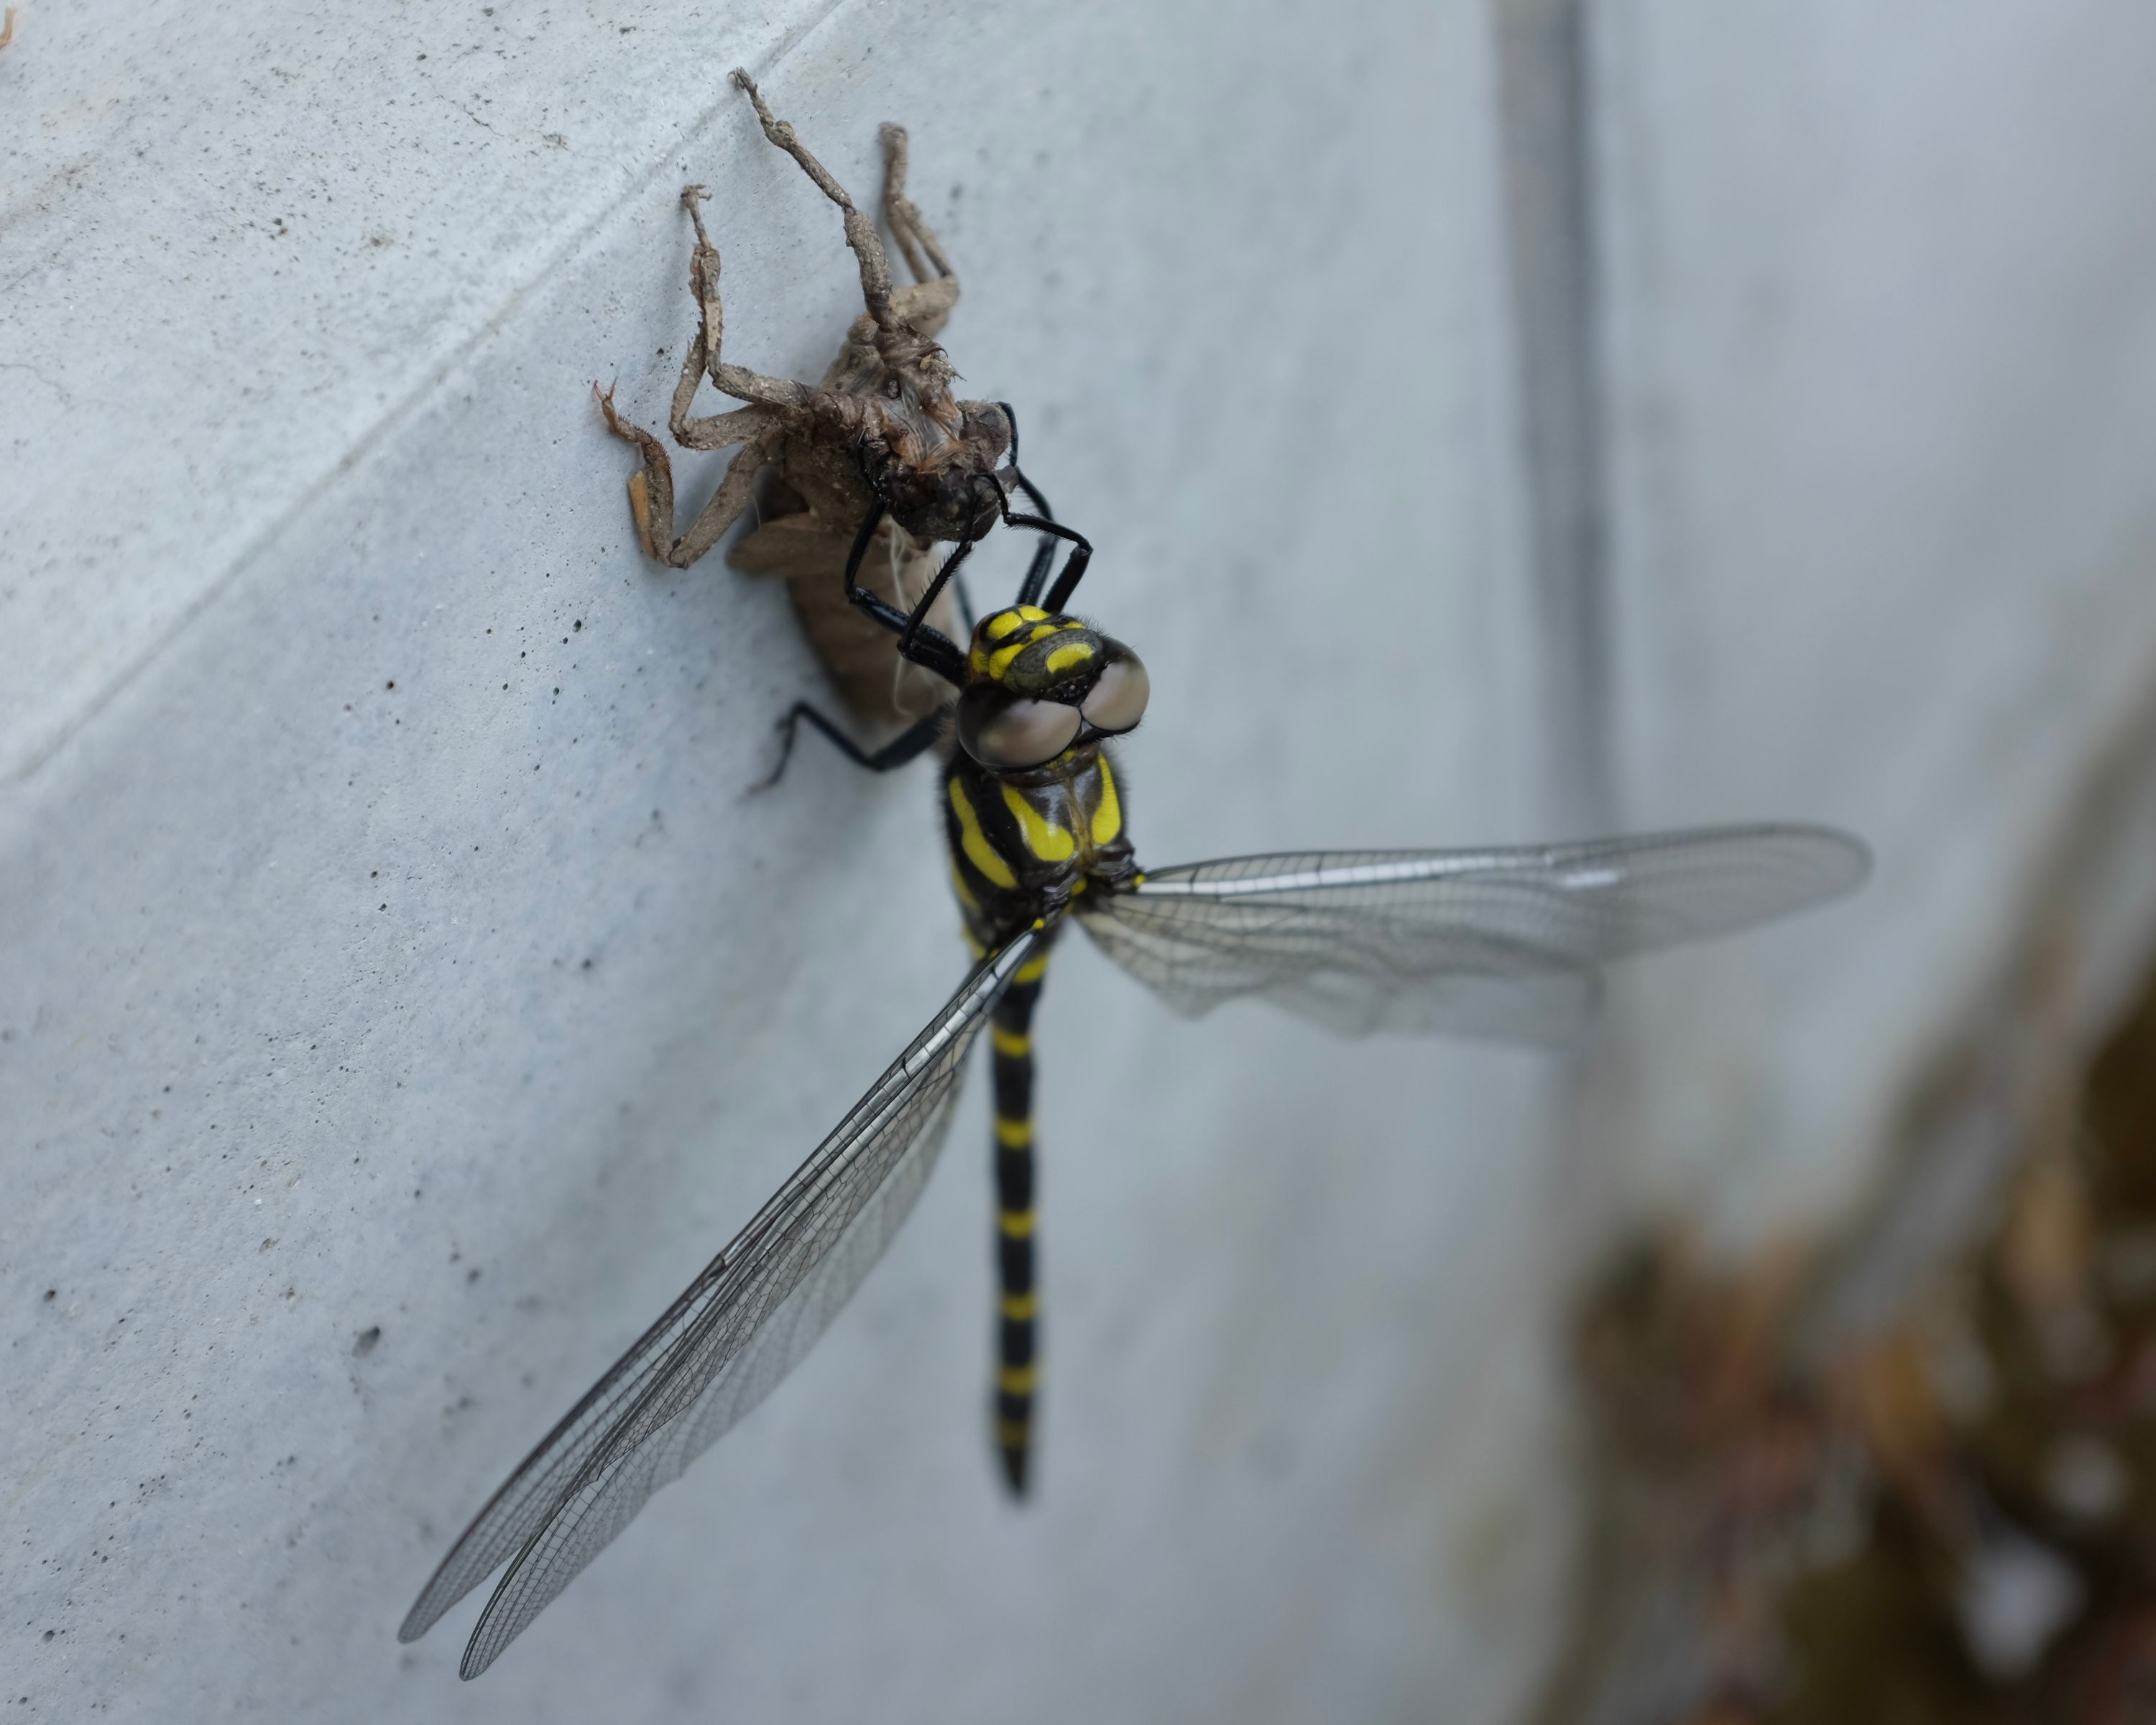 A yellow dragonfly emerges from its nymph.